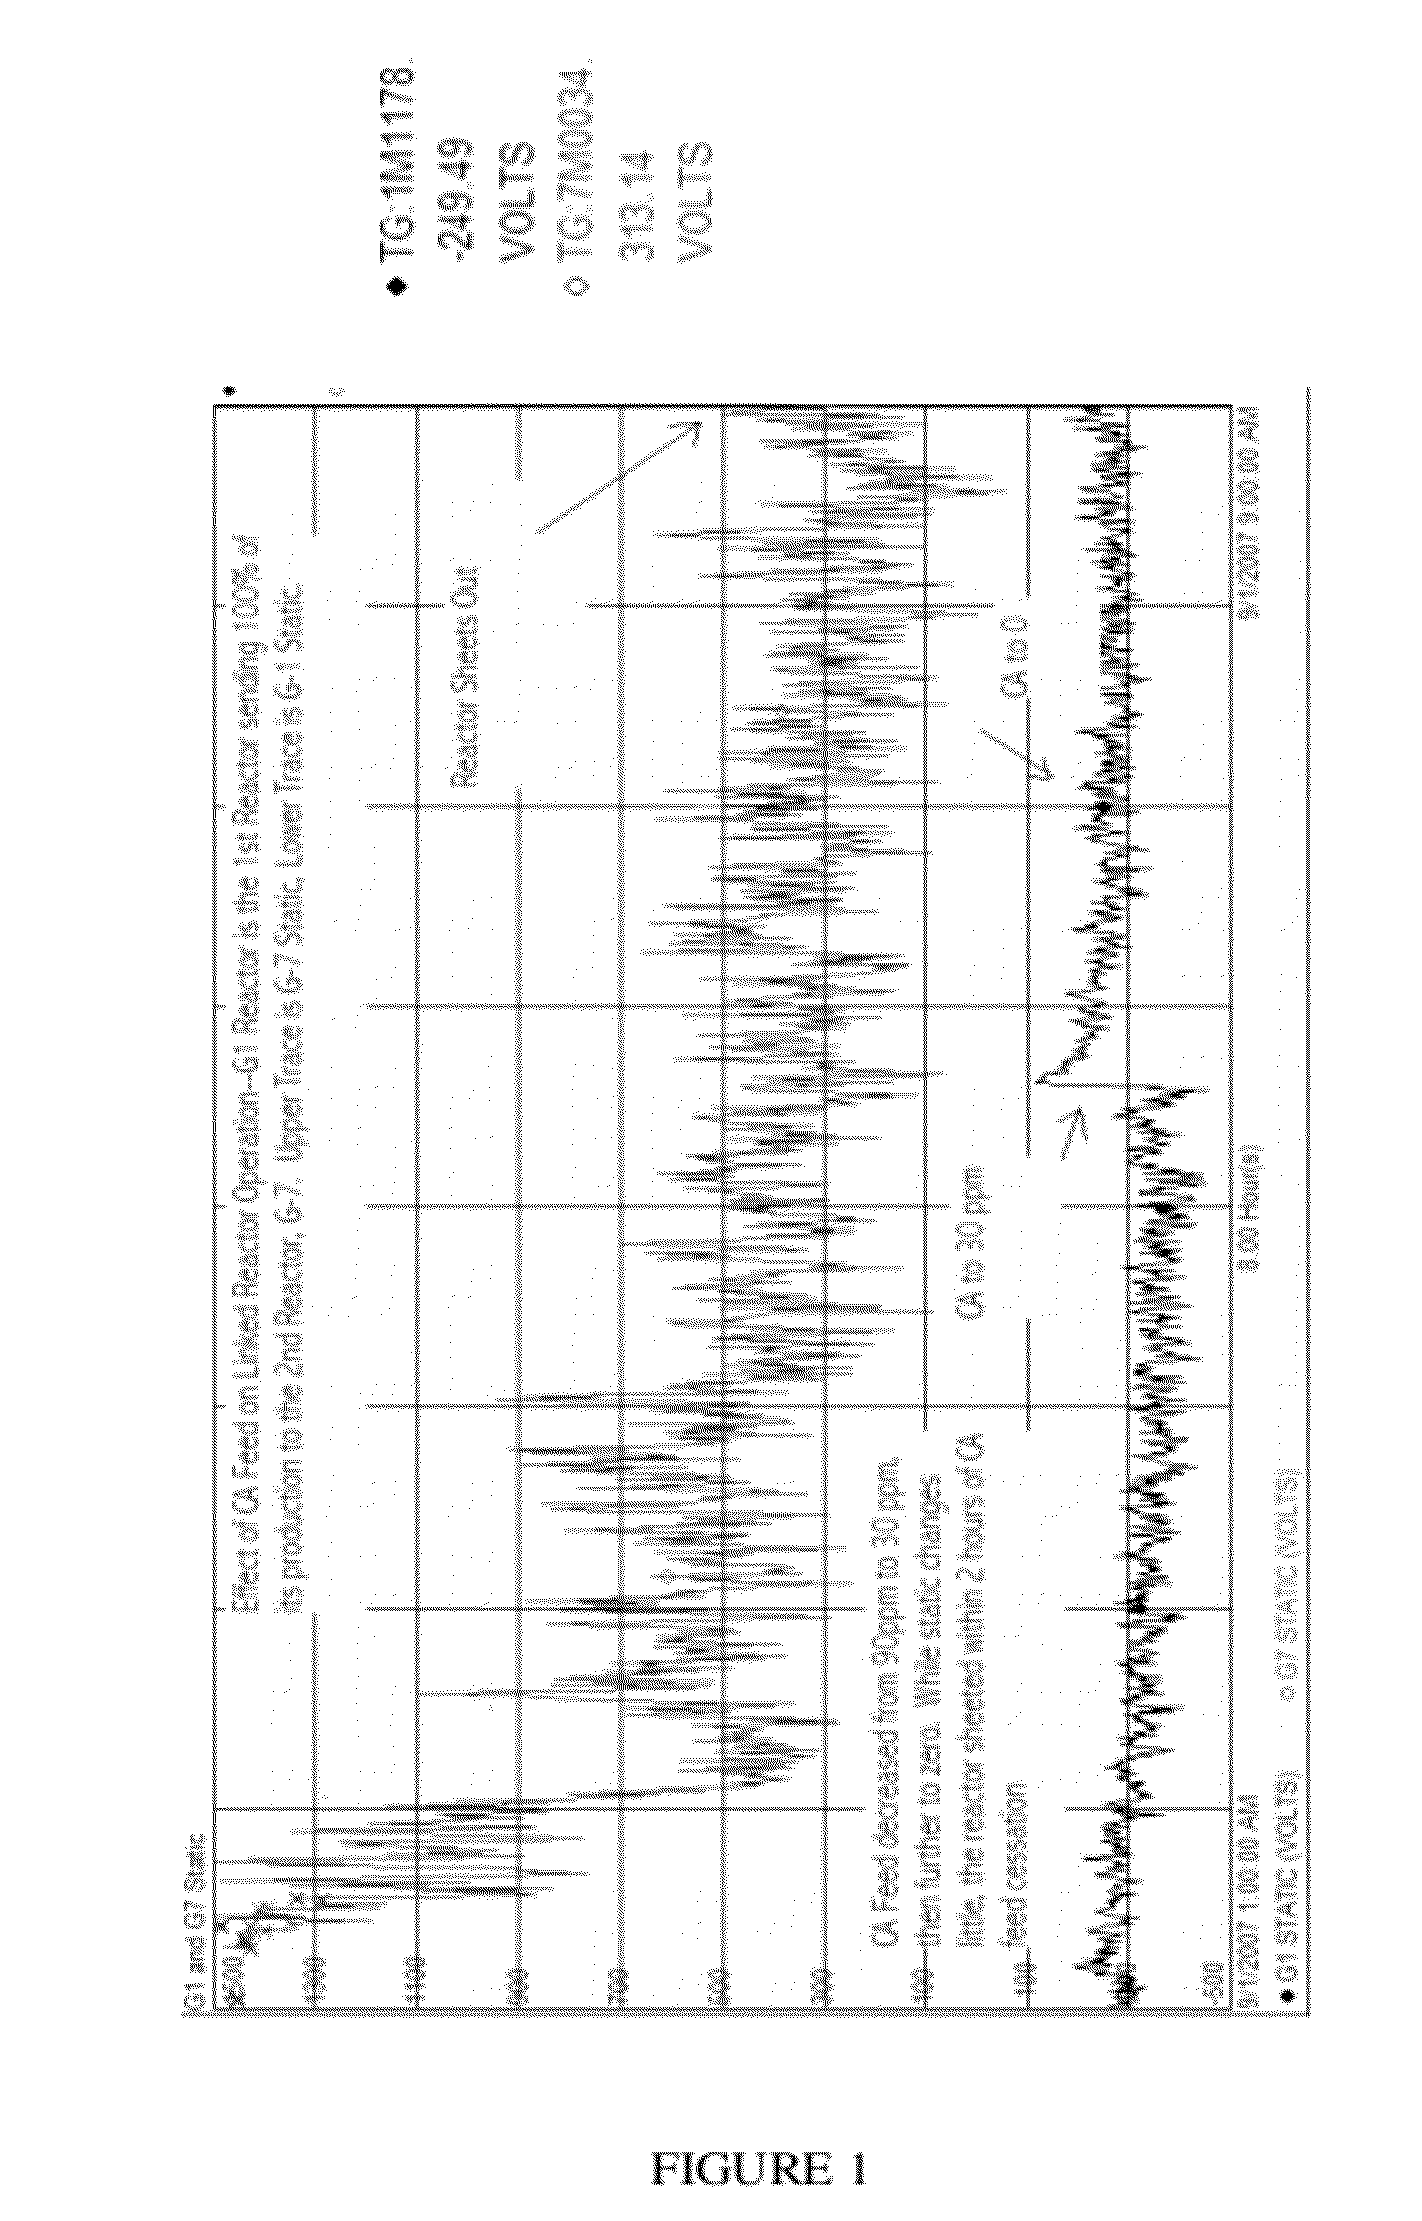 Ethylene-based polymer compositions, methods of making the same, and articles prepared from the same